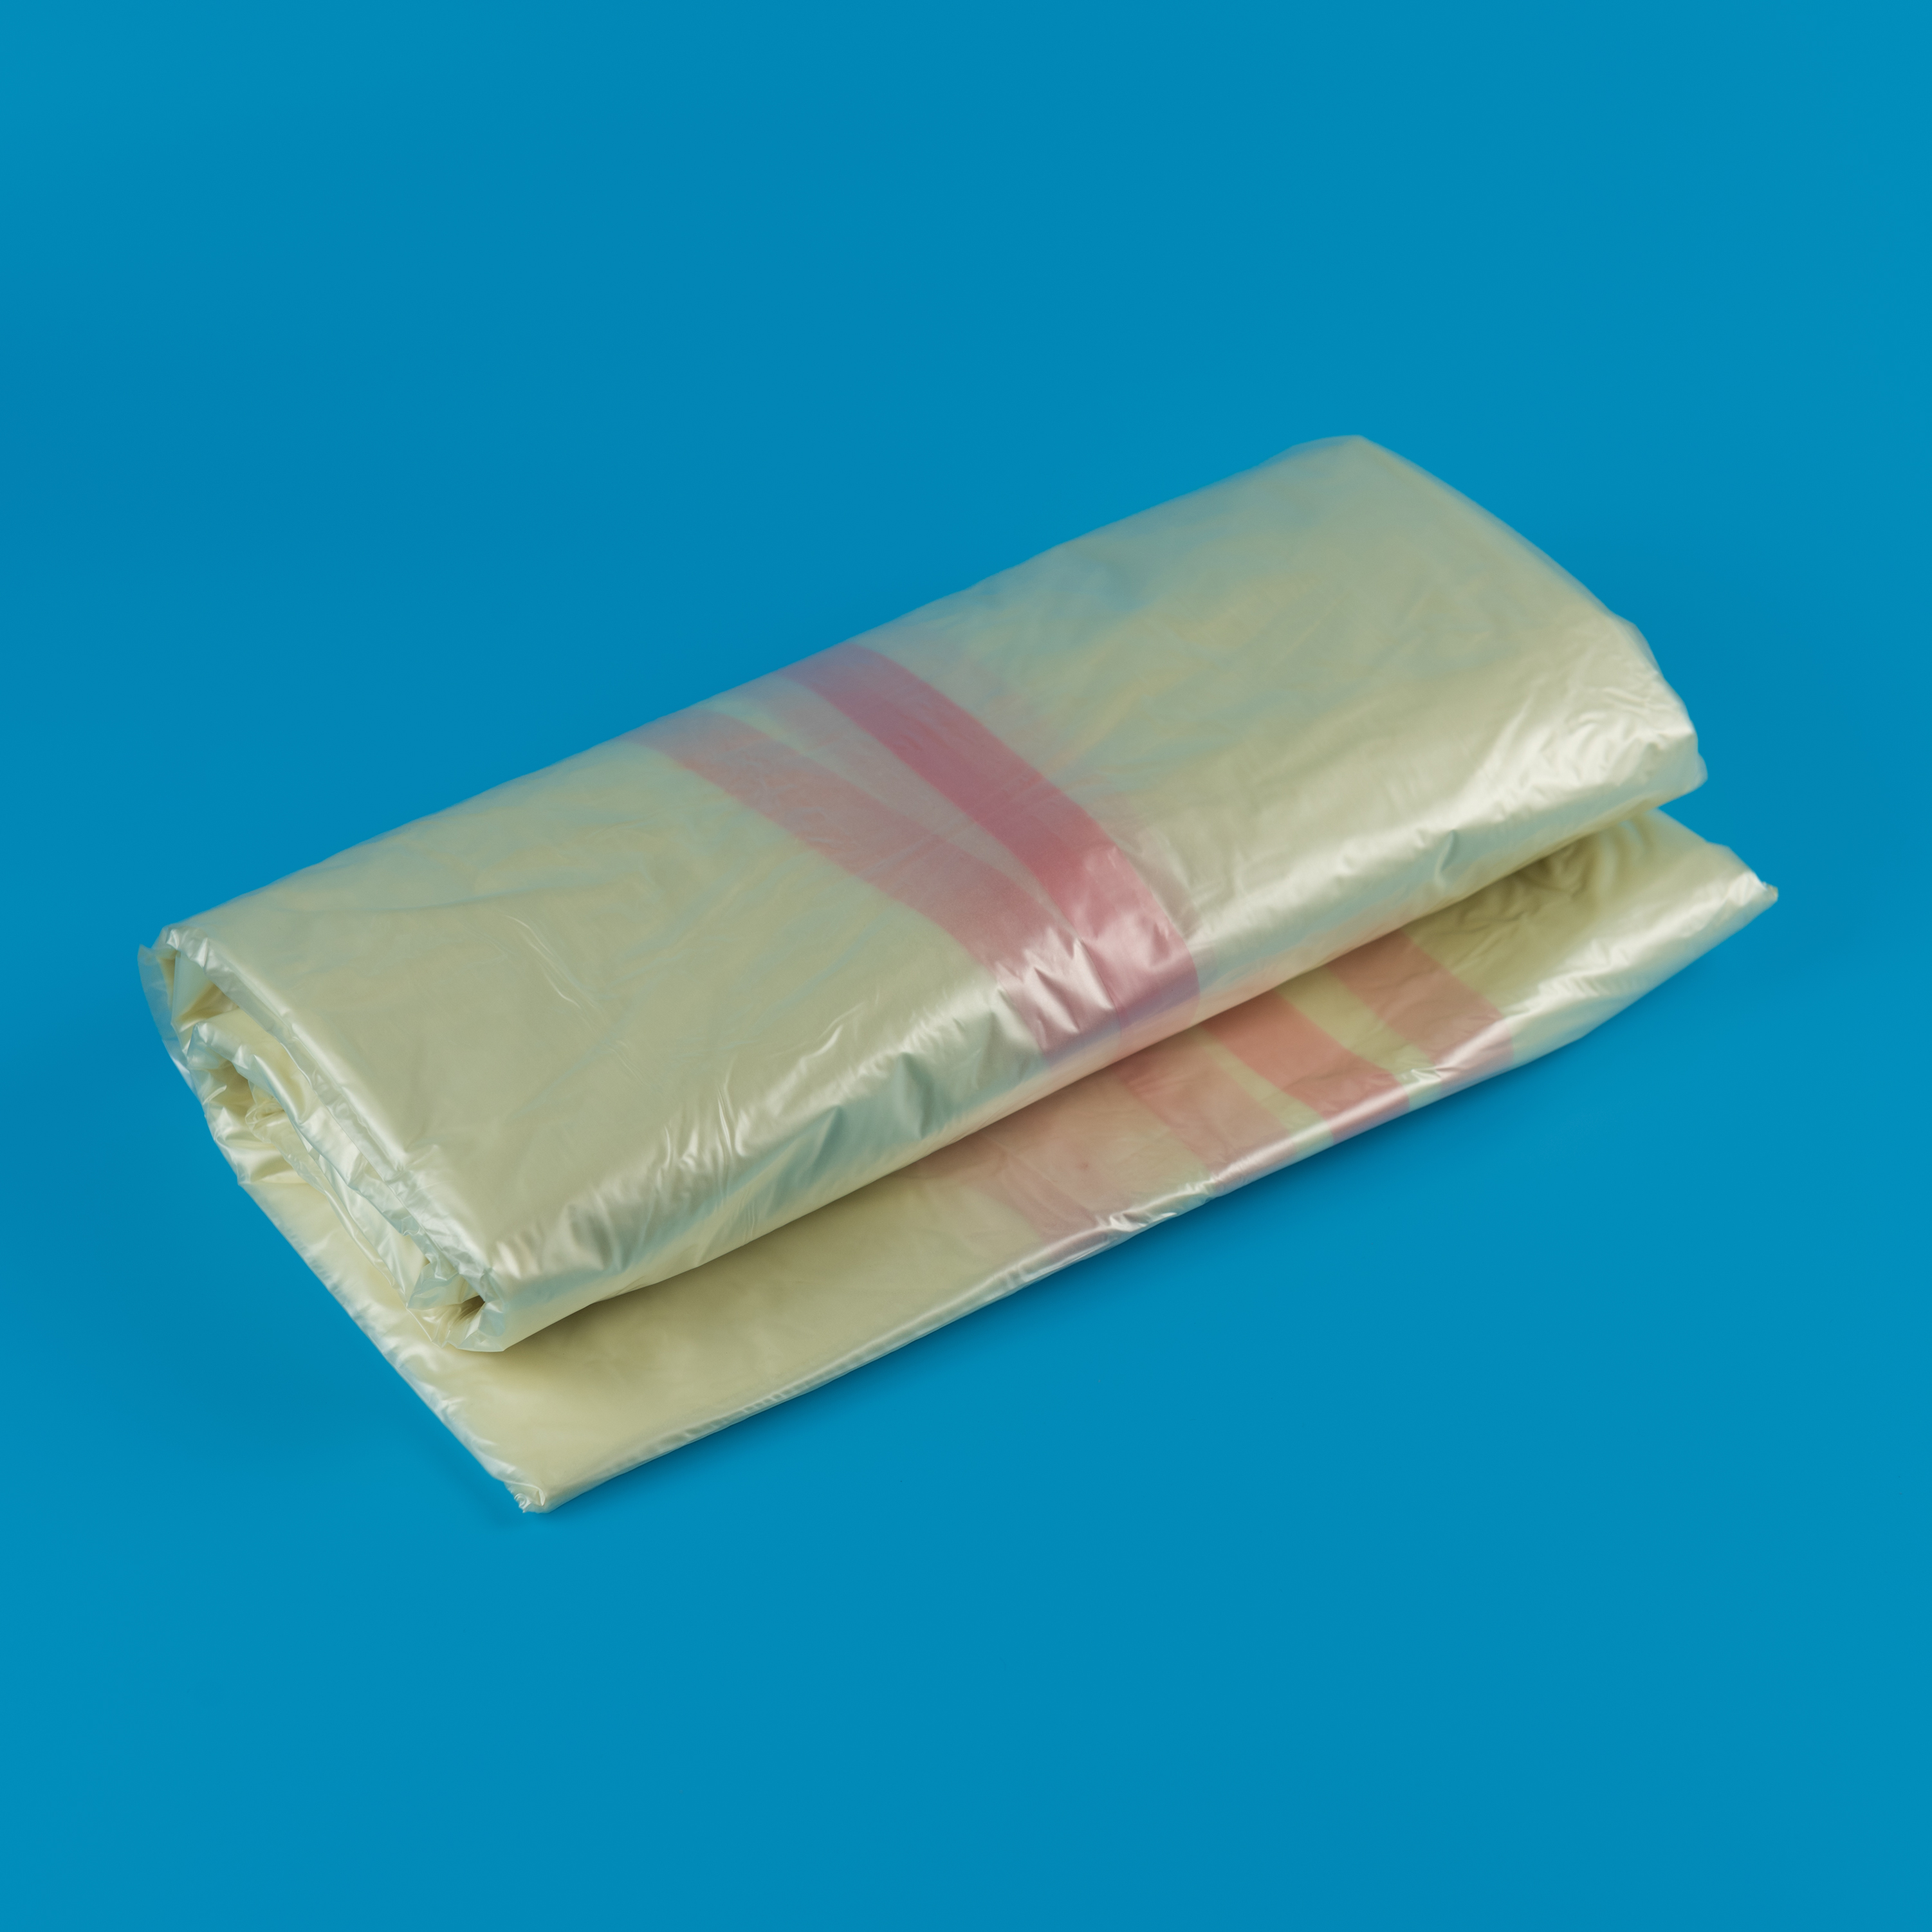 Dissolvable PVA Biodegradable Water Soluble Bags Refill Rolls